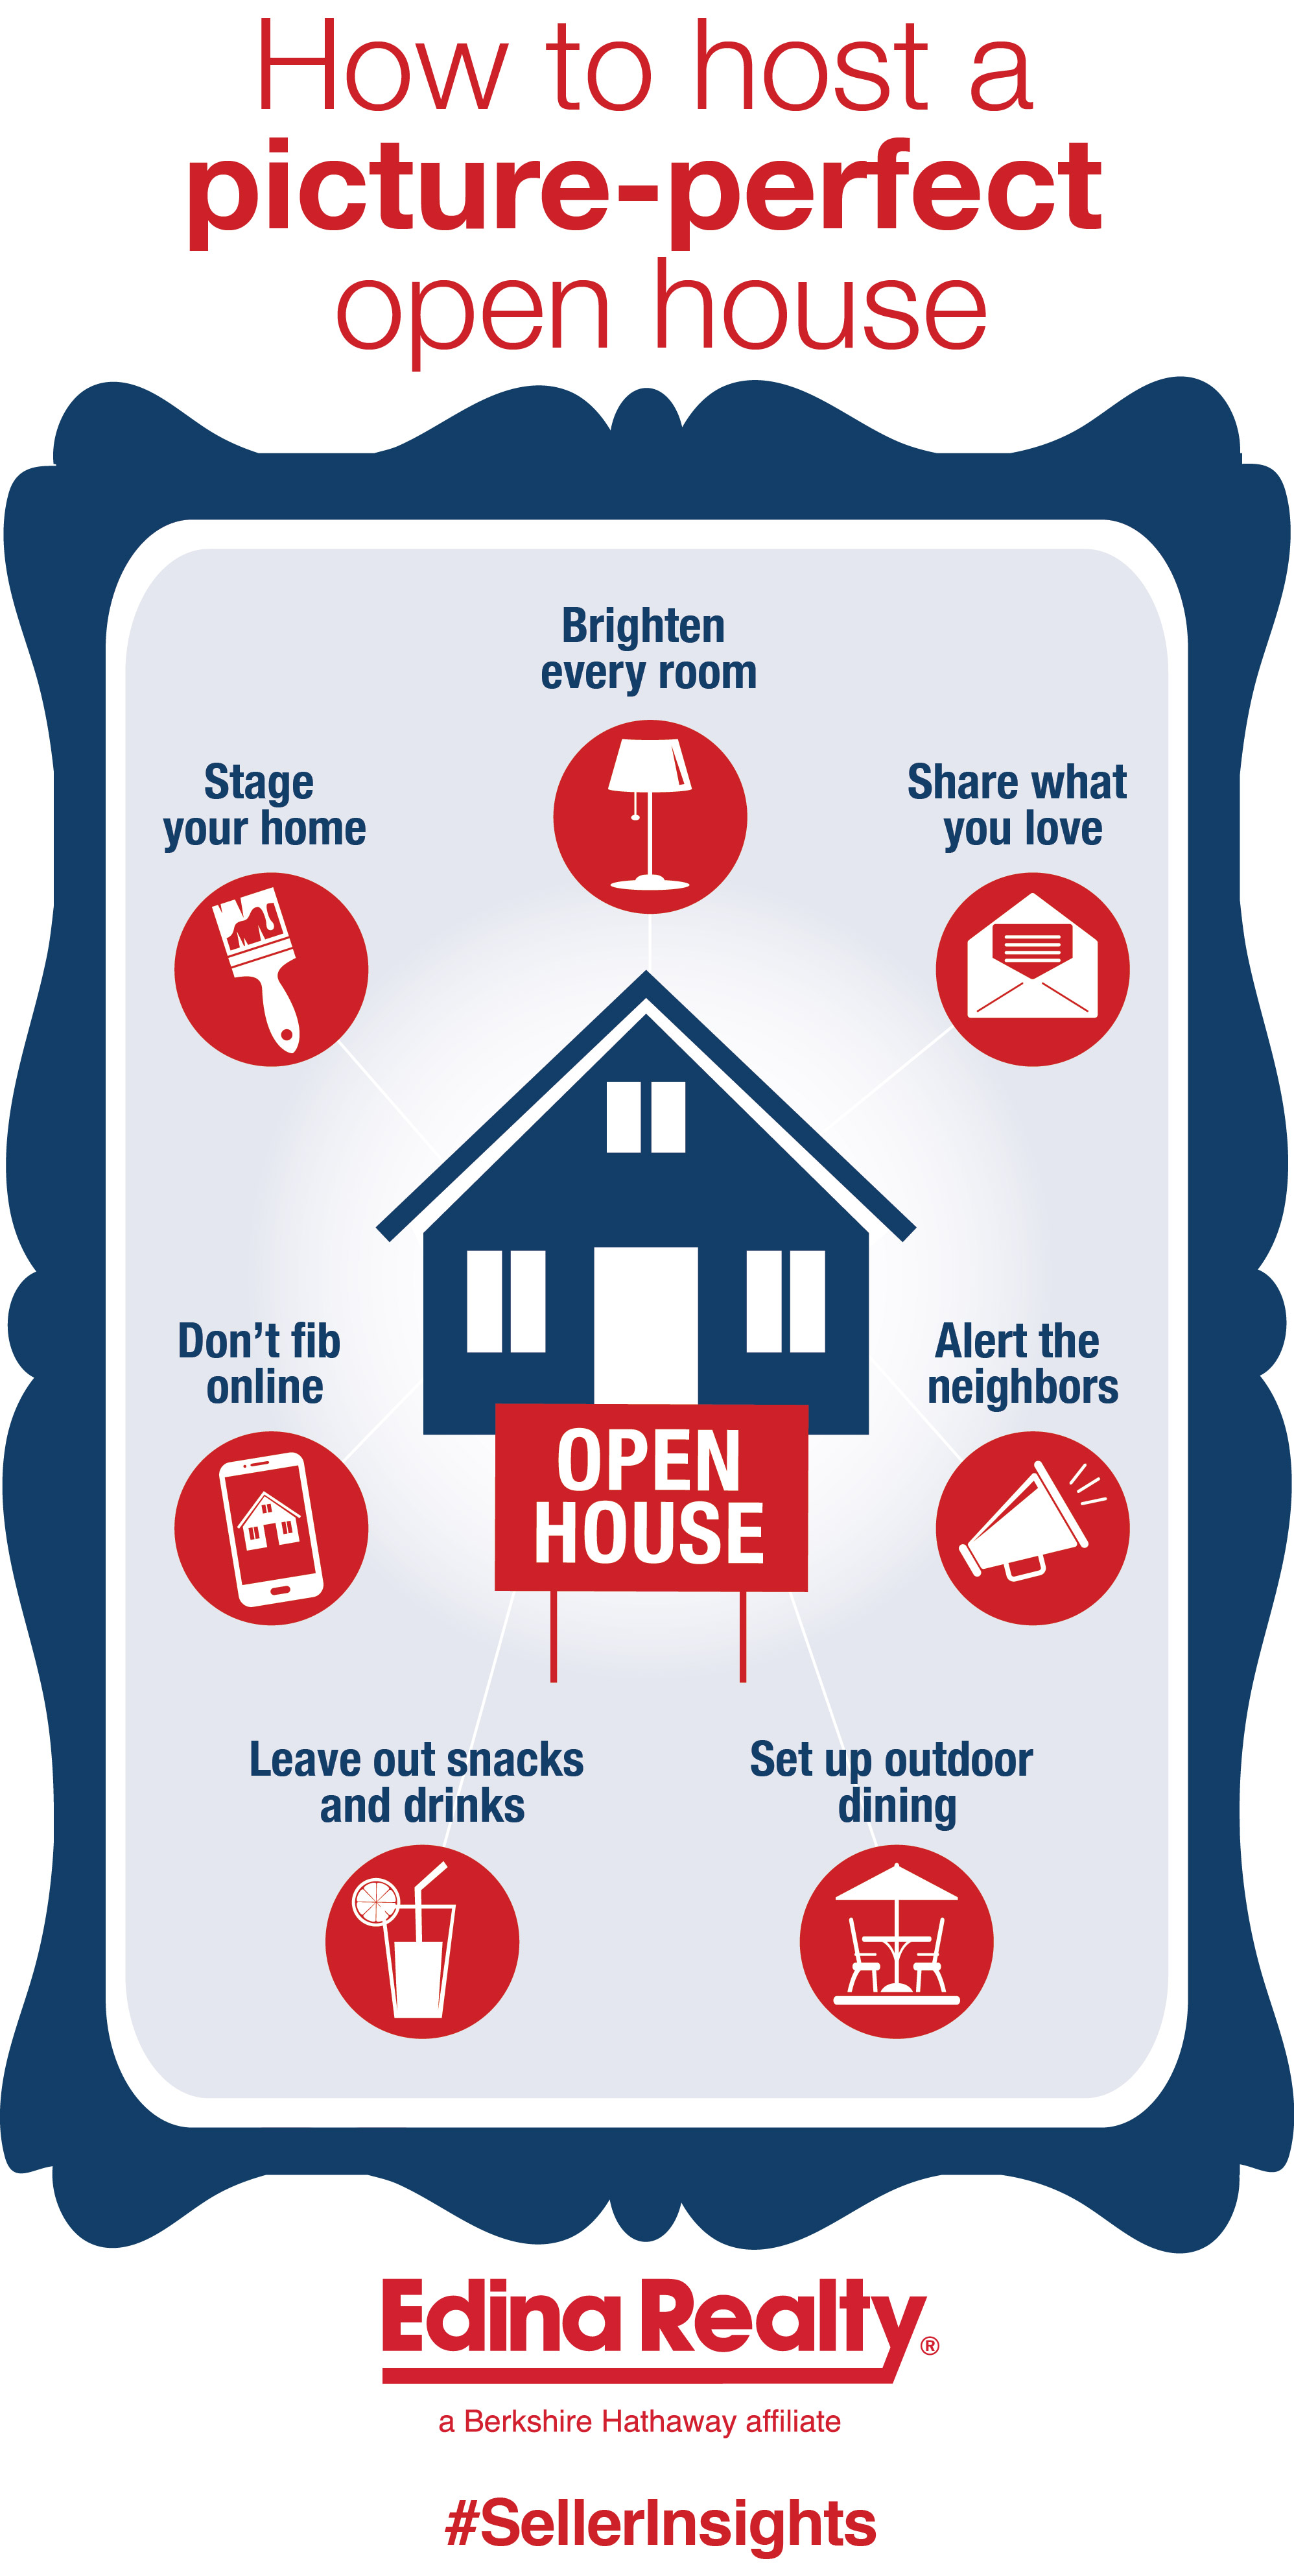 10 Steps to Hosting Your Open House or Grand Opening - Aspen Catering